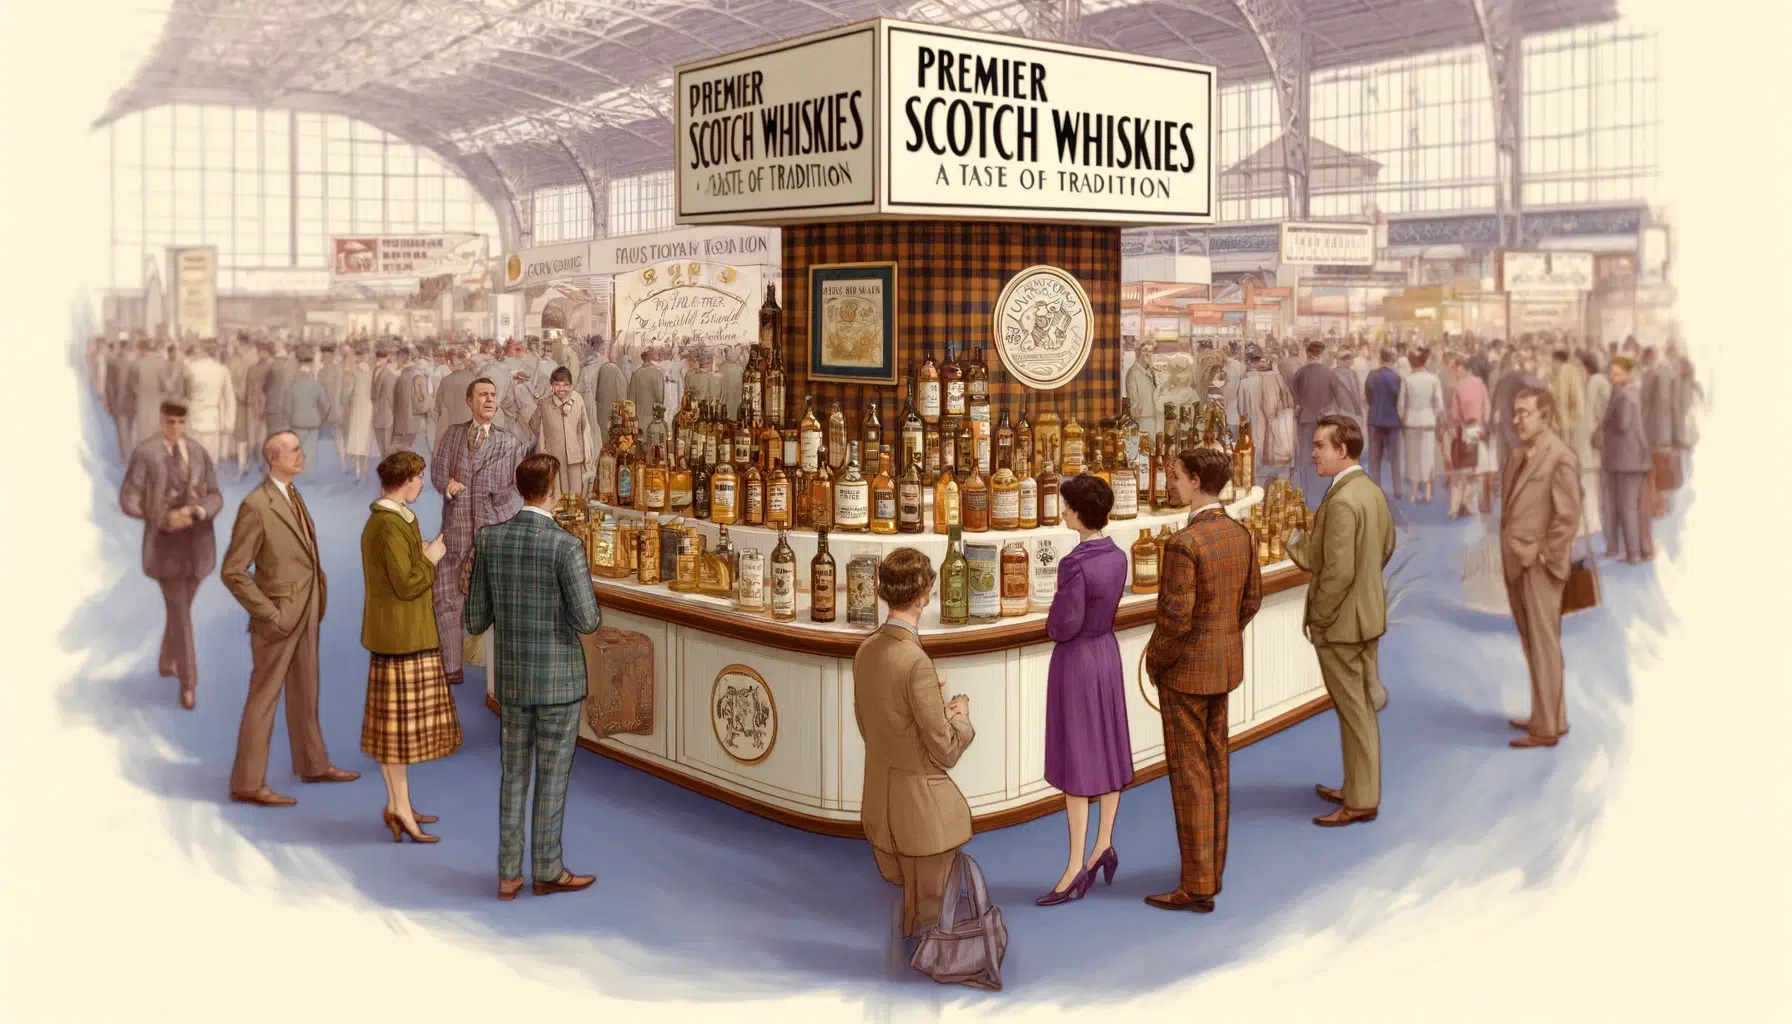 Vintage Scotch whisky fair illustration with attendees.